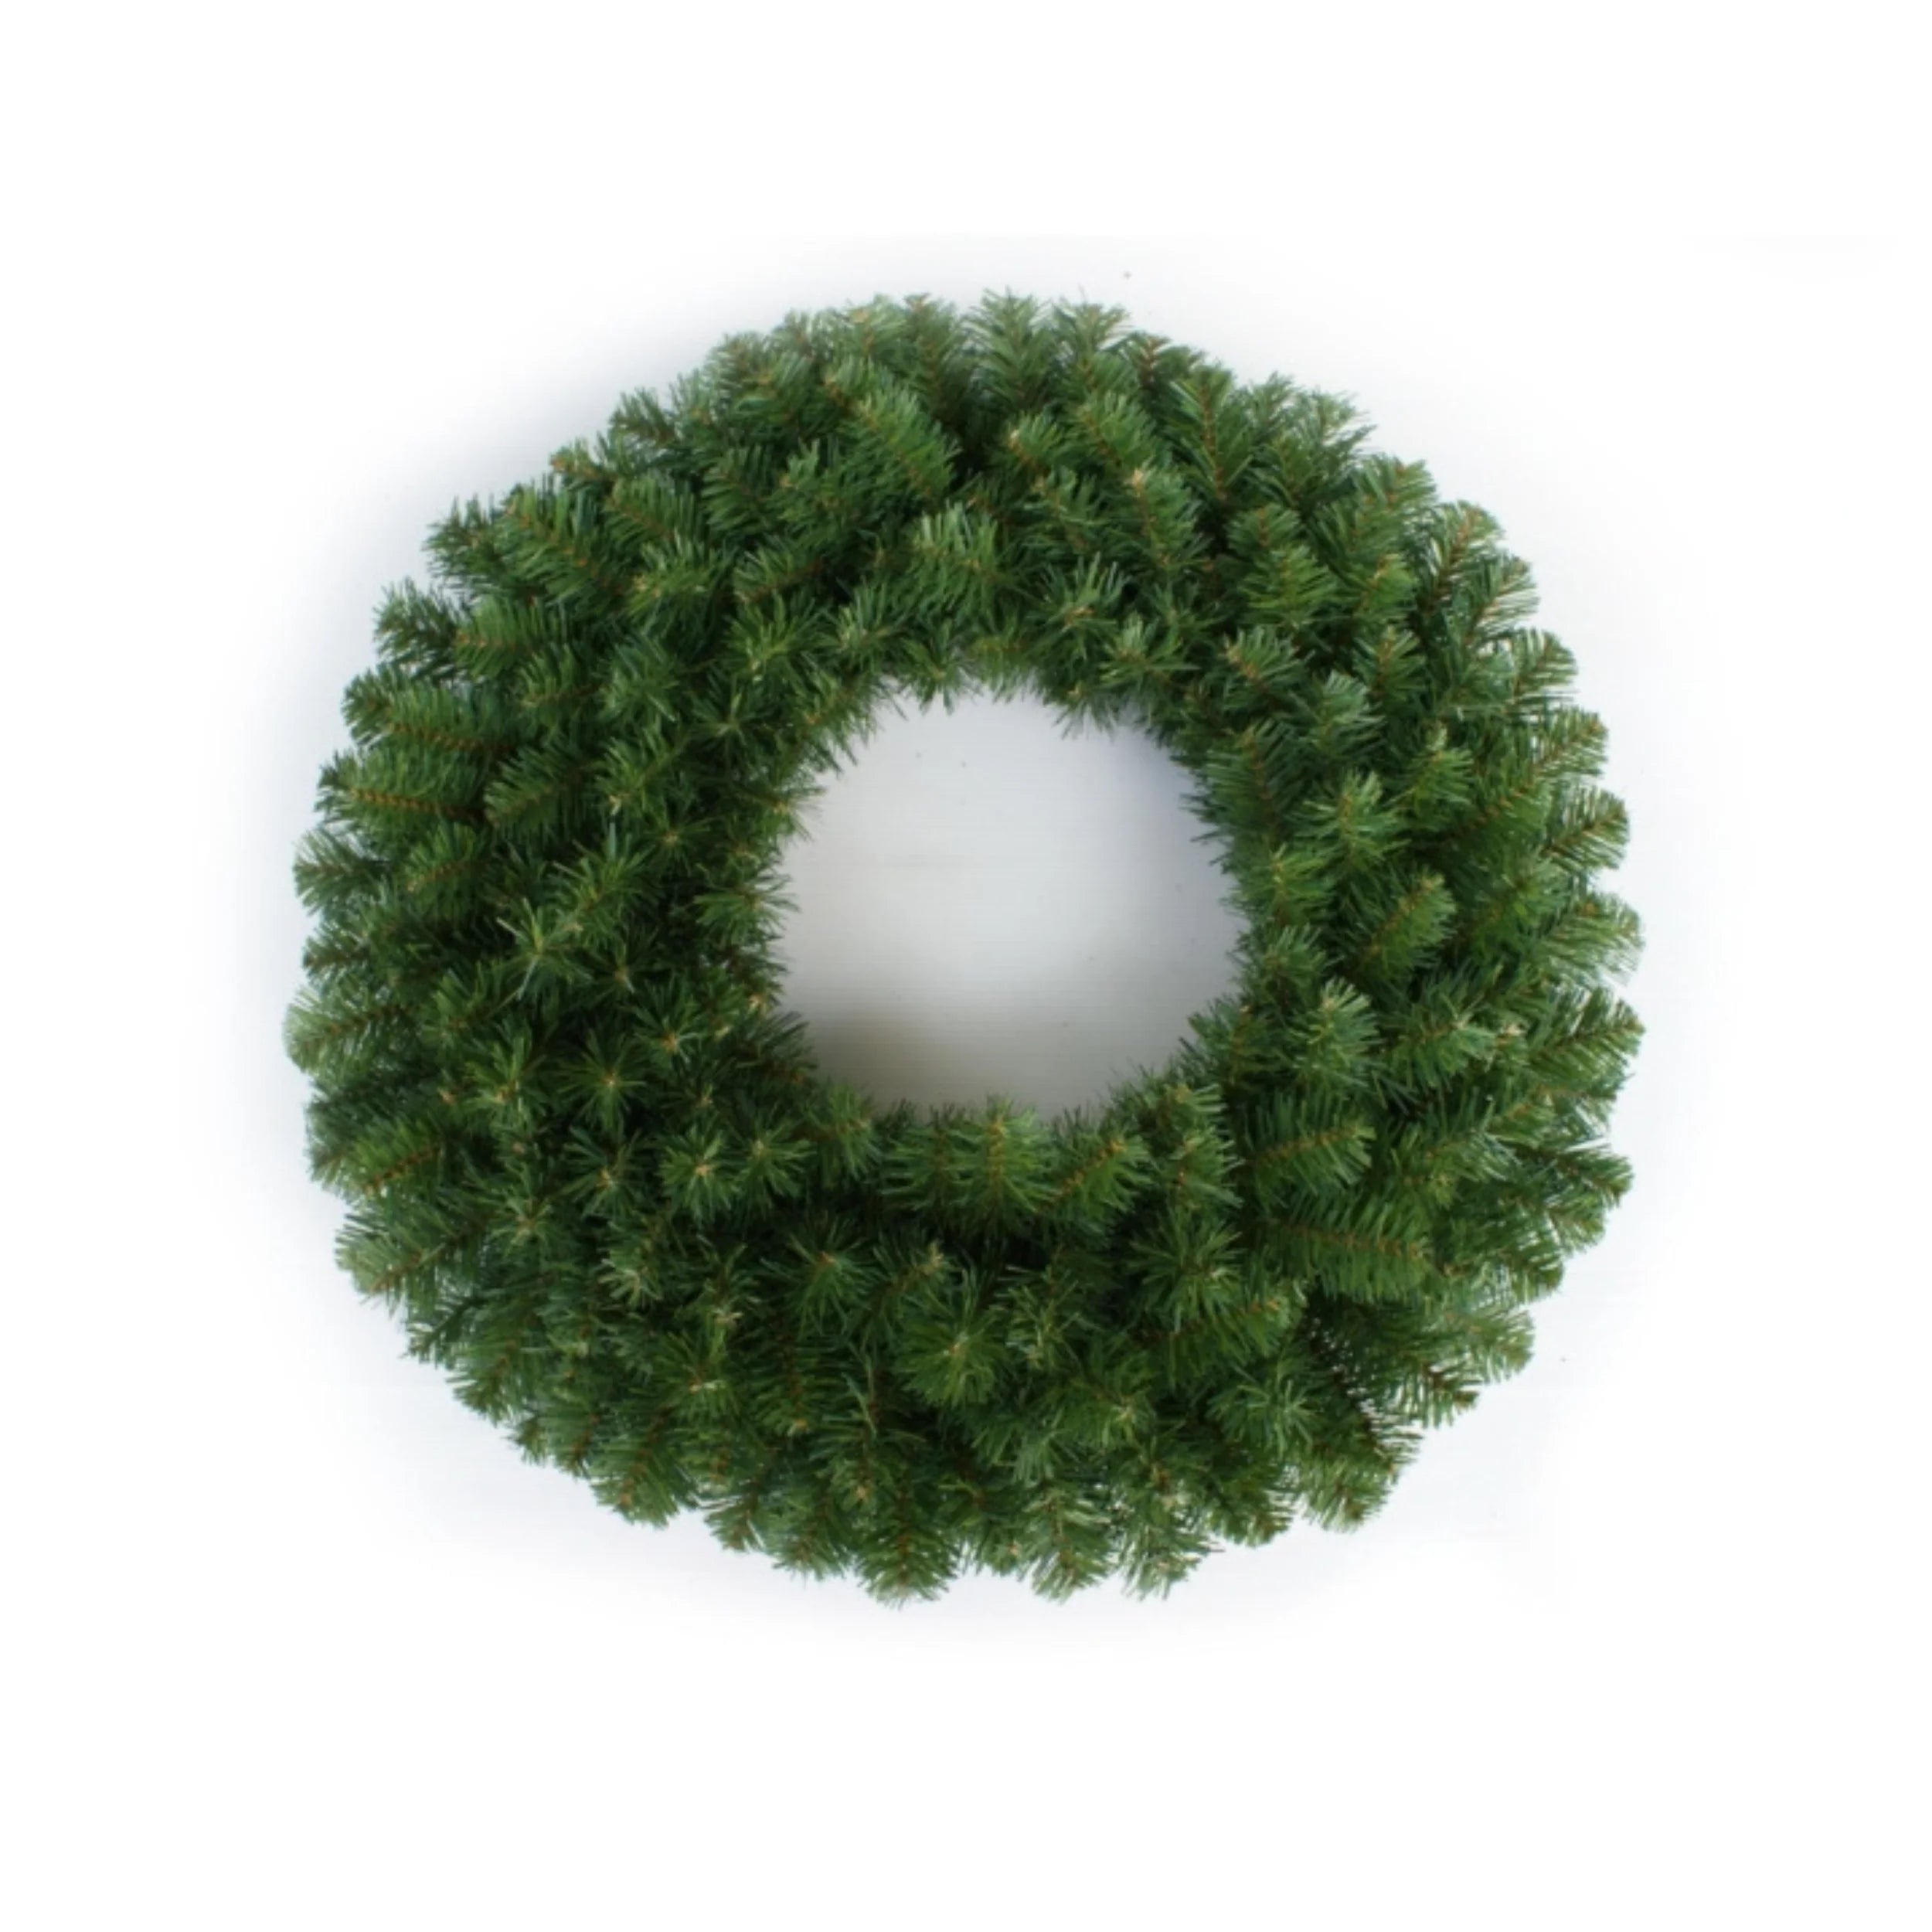 Northern Spruce Wreath - 20" Wide with 200 Lifelike Tips (Set of 12)